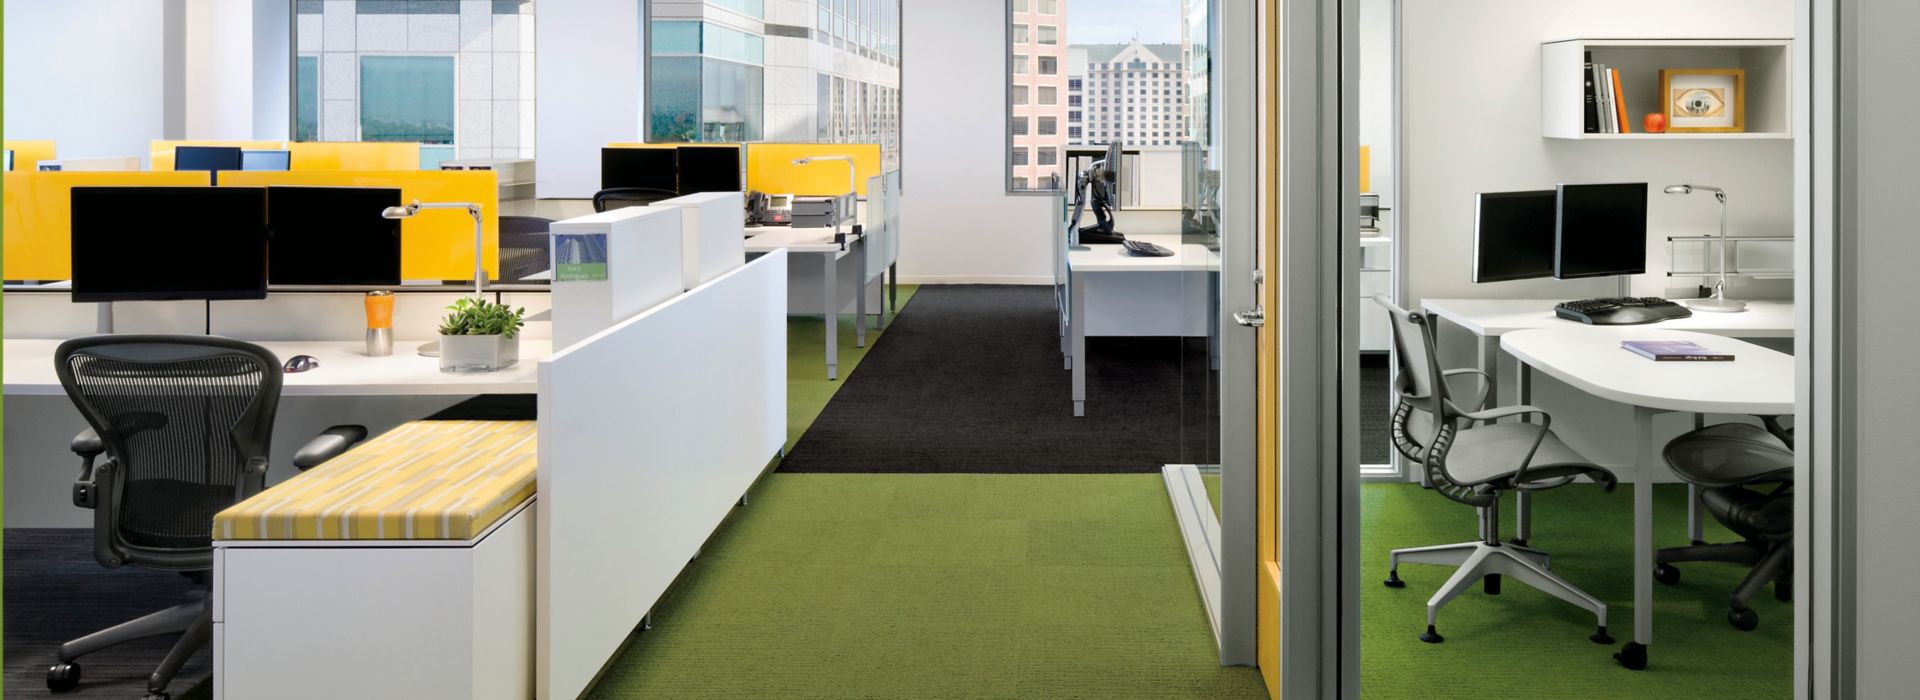 Interface Monochrome and Striation carpet tile in walkway of office with multiple open offices and a private office